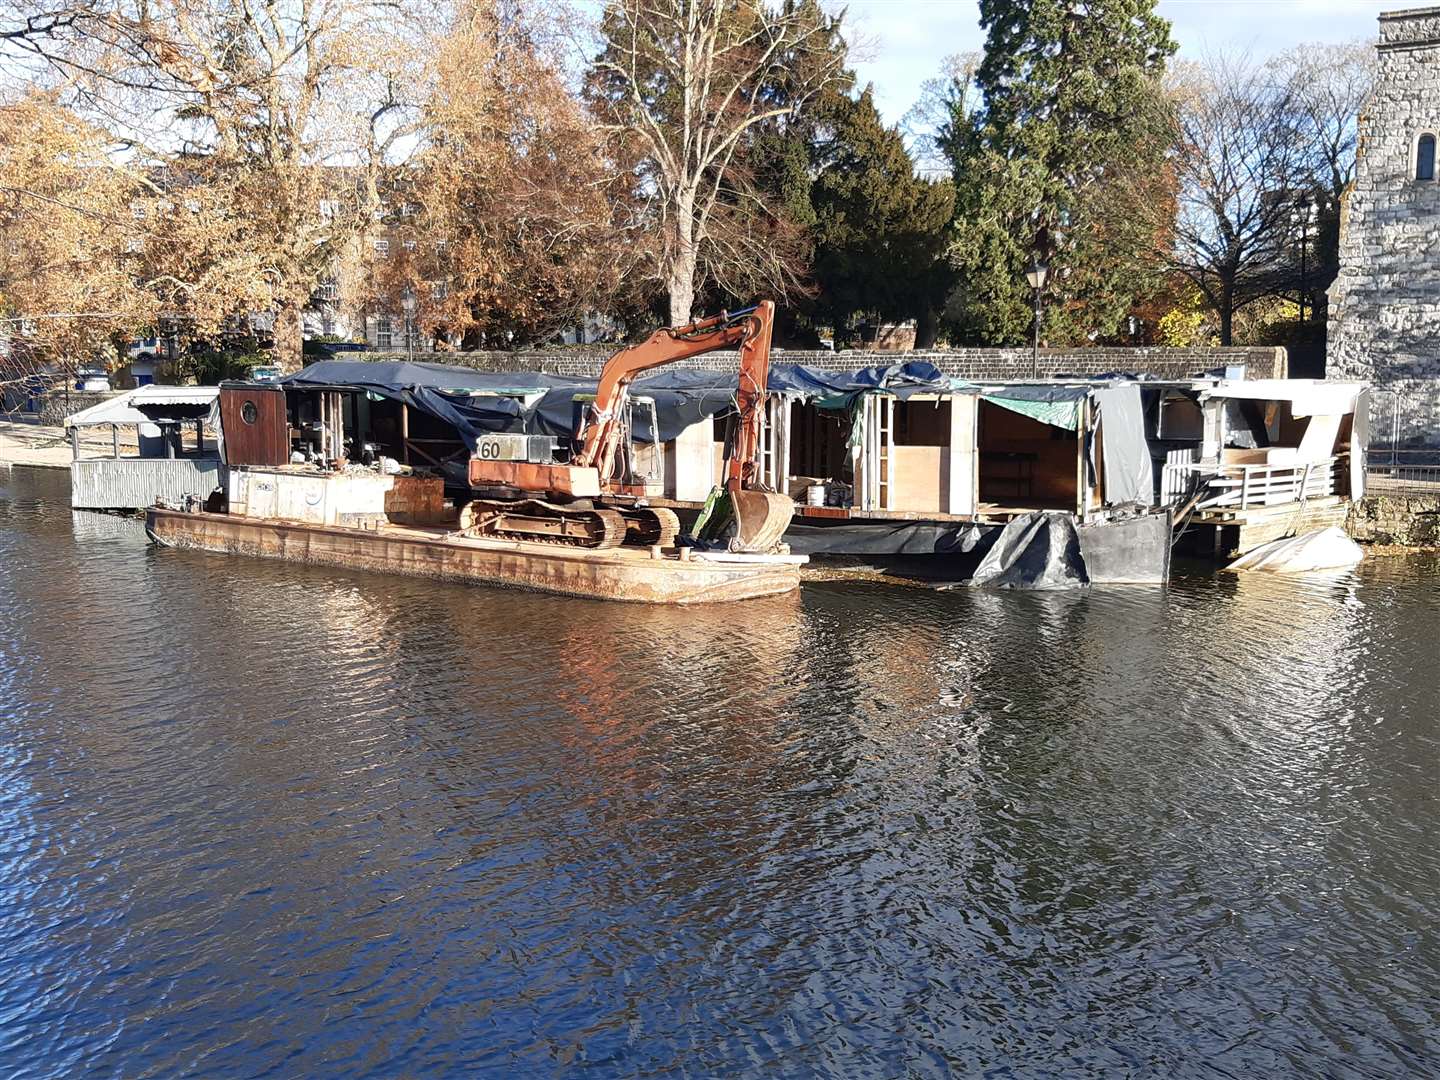 Work begins to tow away the Embankments bar and restaurant barge in Maidstone